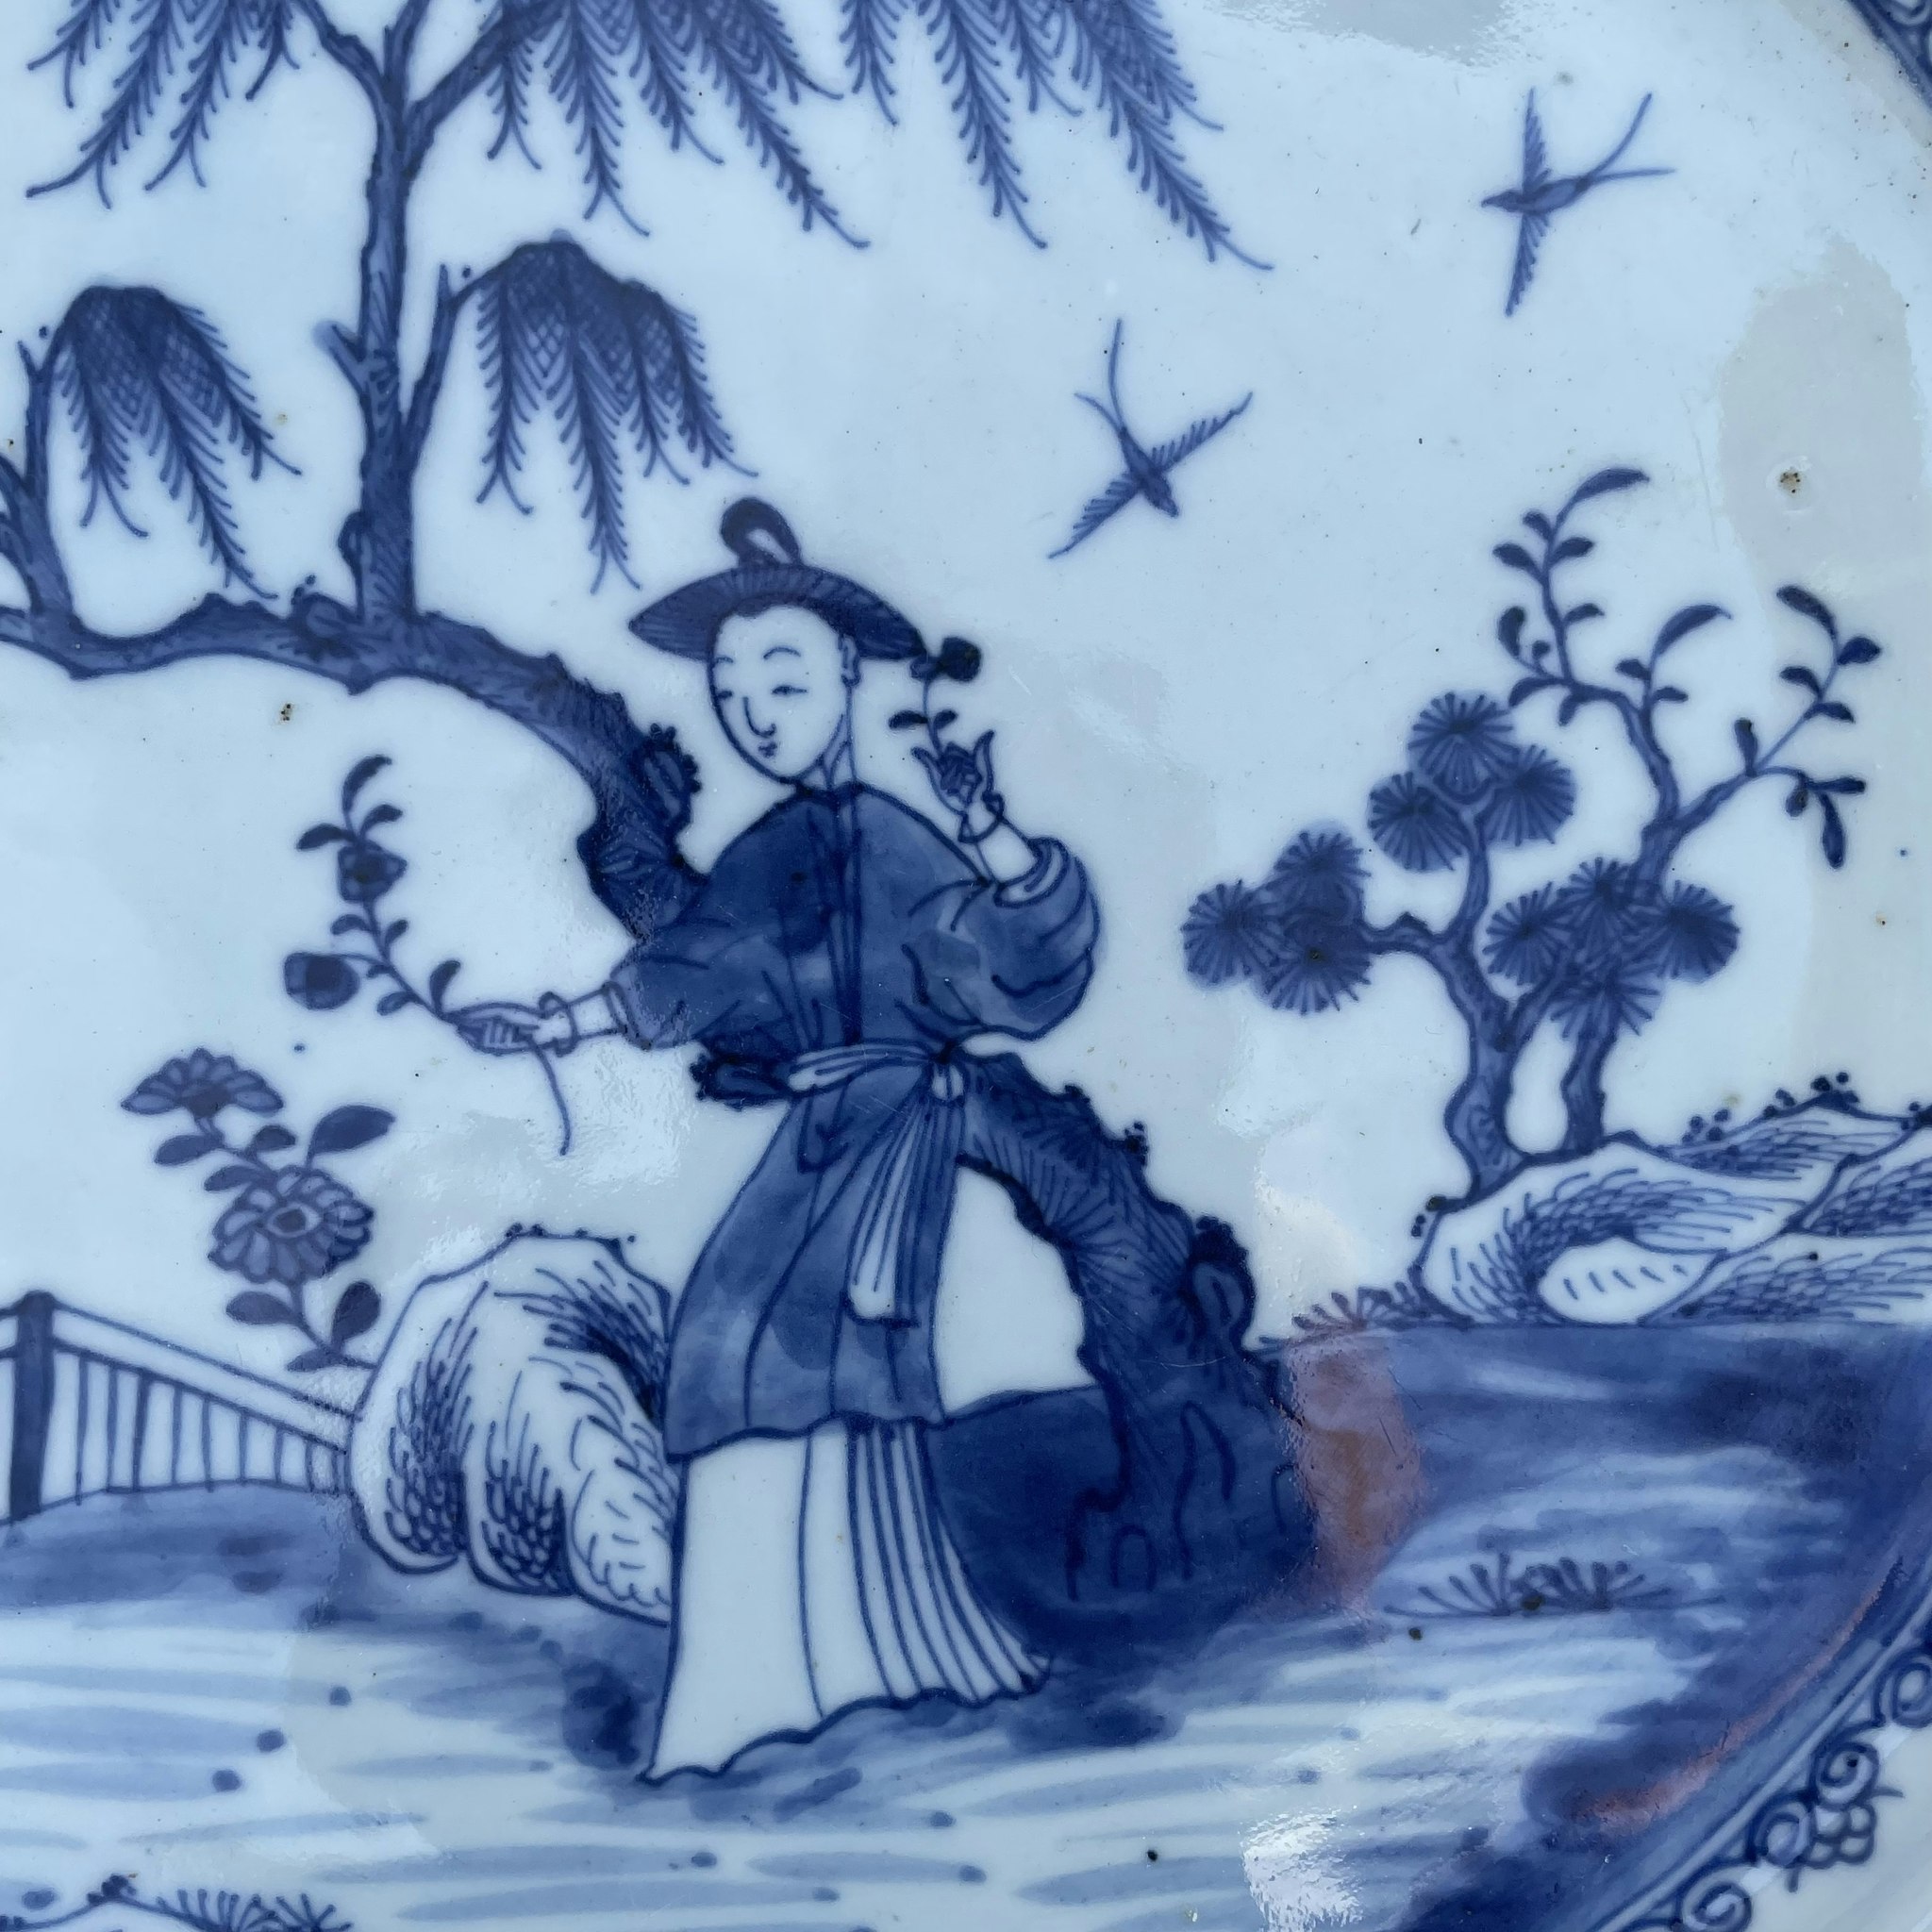 Chinese Antique Underglazed Blue and White Platter, Qianlong Period #1523